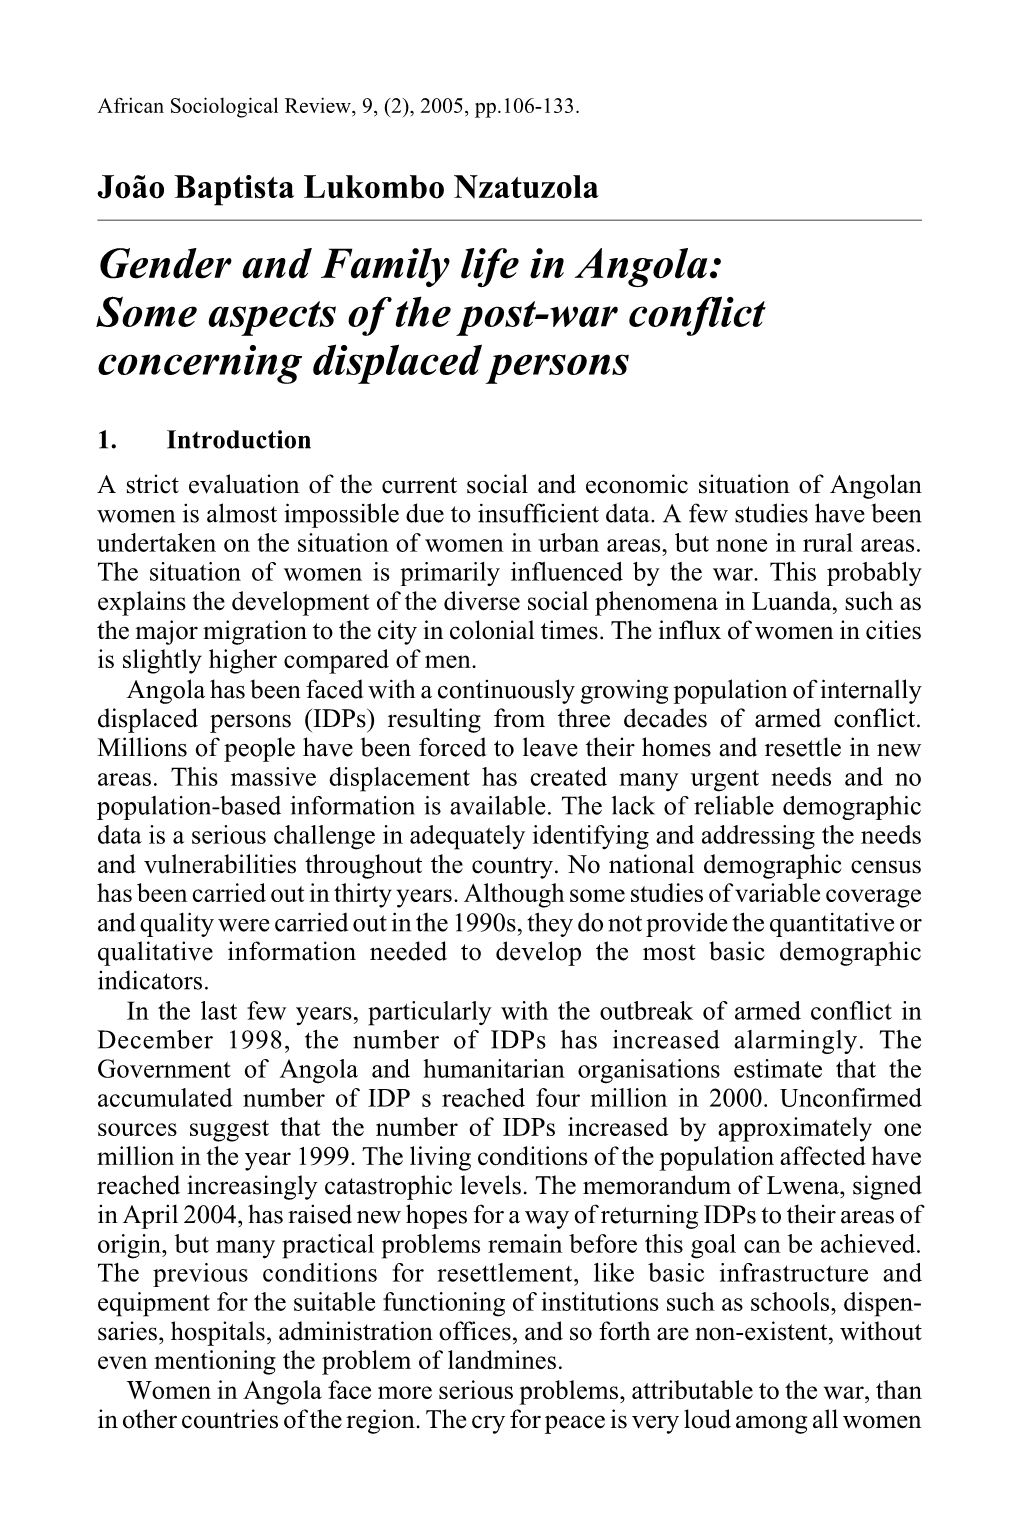 Gender and Family Life in Angola: Some Aspects of the Post-War Conflict Concerning Displaced Persons